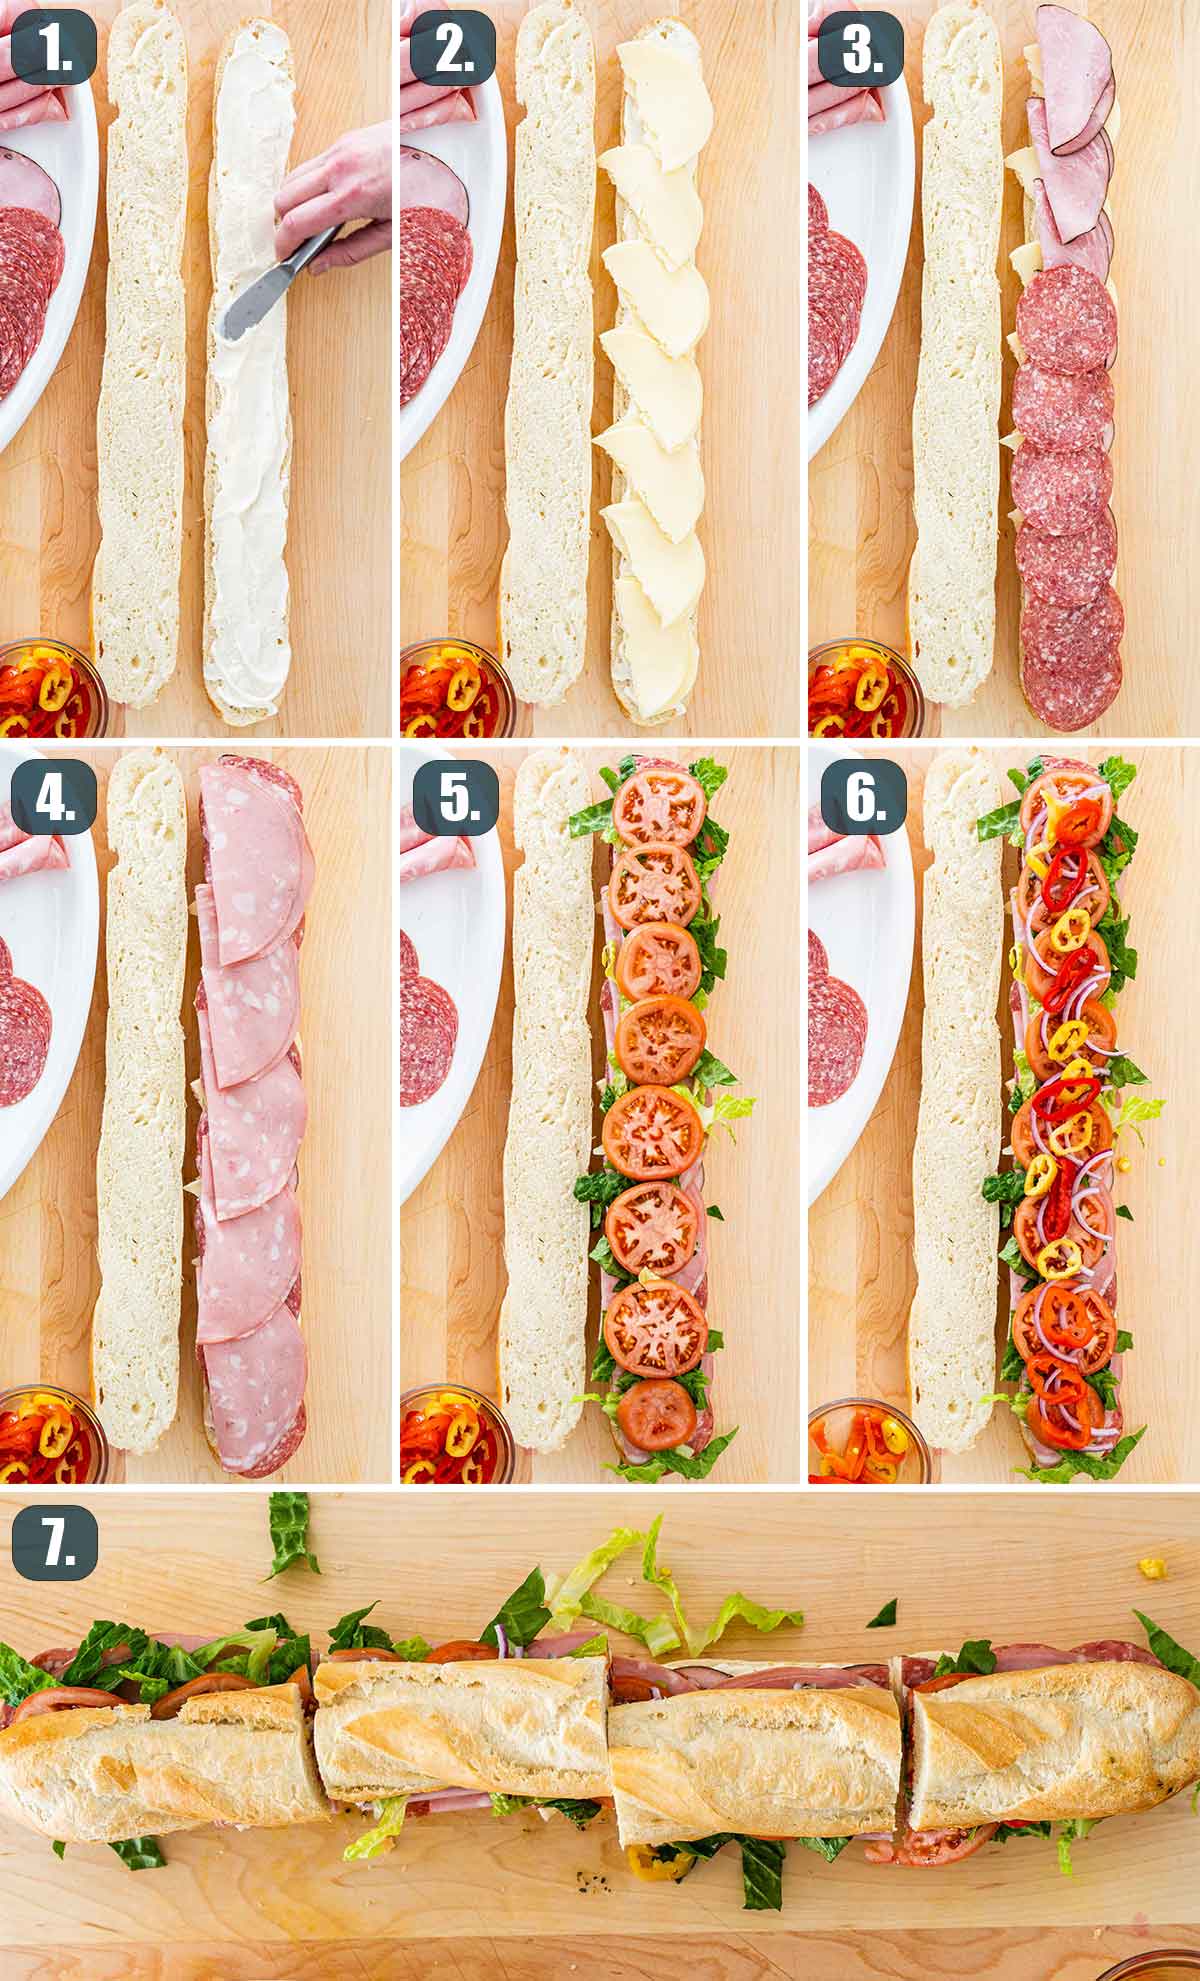 detailed process shots showing how to make italian sub sandwich.